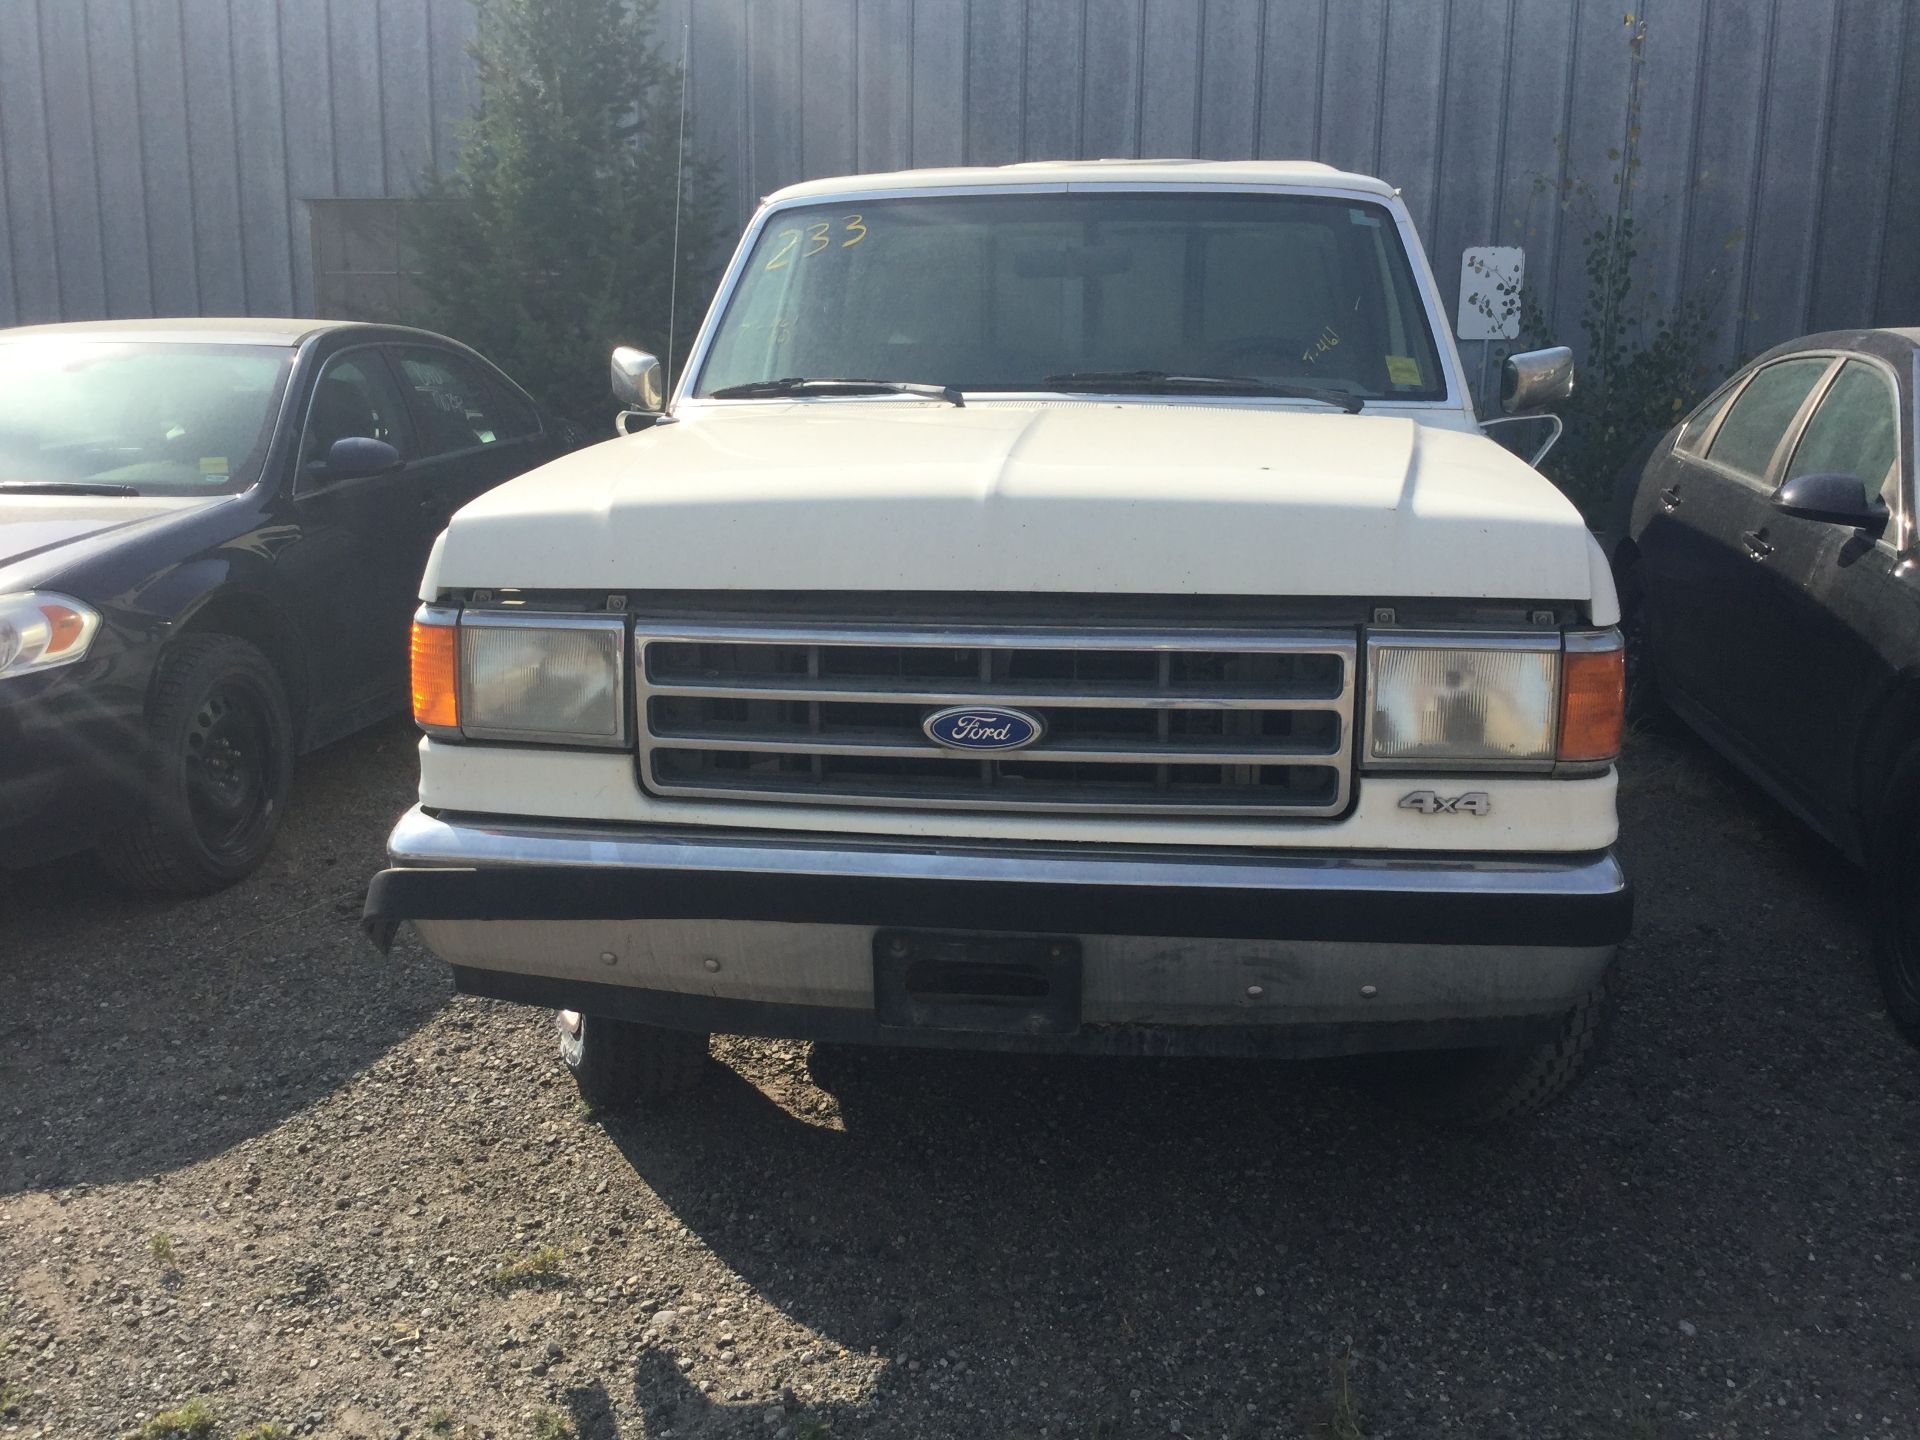 Year: 1989 Make: Ford Model: 1/2T Type: Pickup Vin#: A93975 Mileage/Hours: 20257 5.0L, 5sp, 4x4, RC, - Image 2 of 4